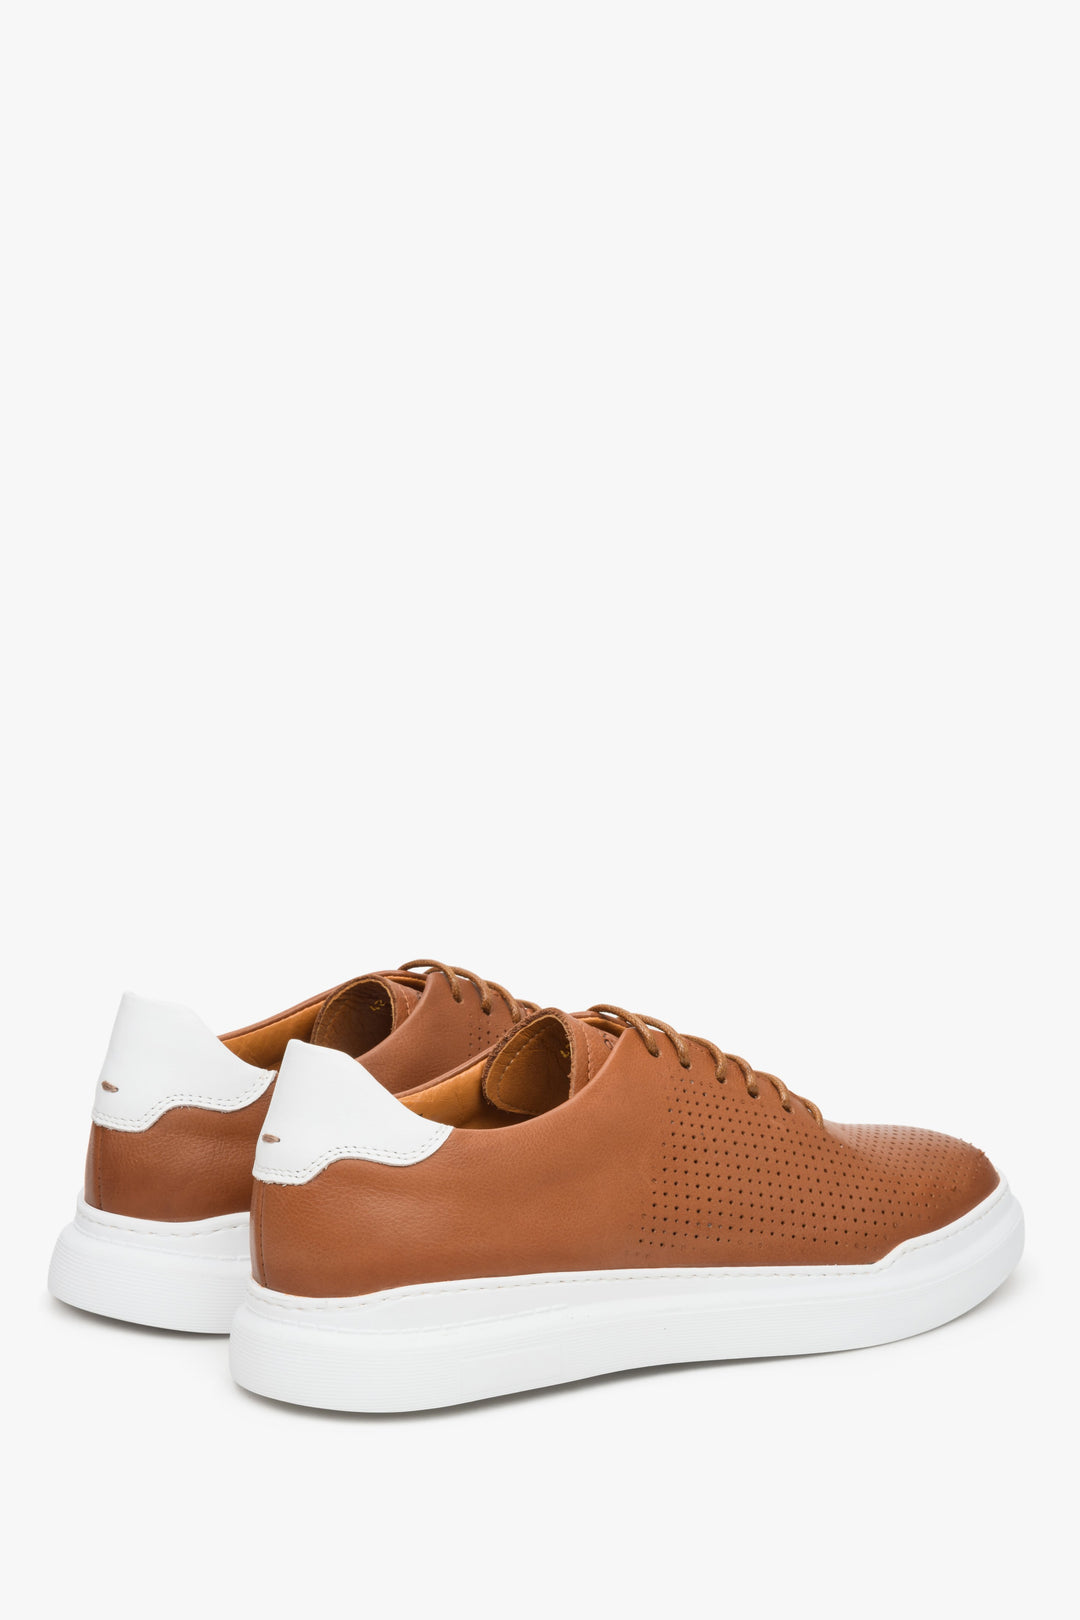 Brown leather Estro men's sneakers for summer - close-up of the side seam and heel counter.